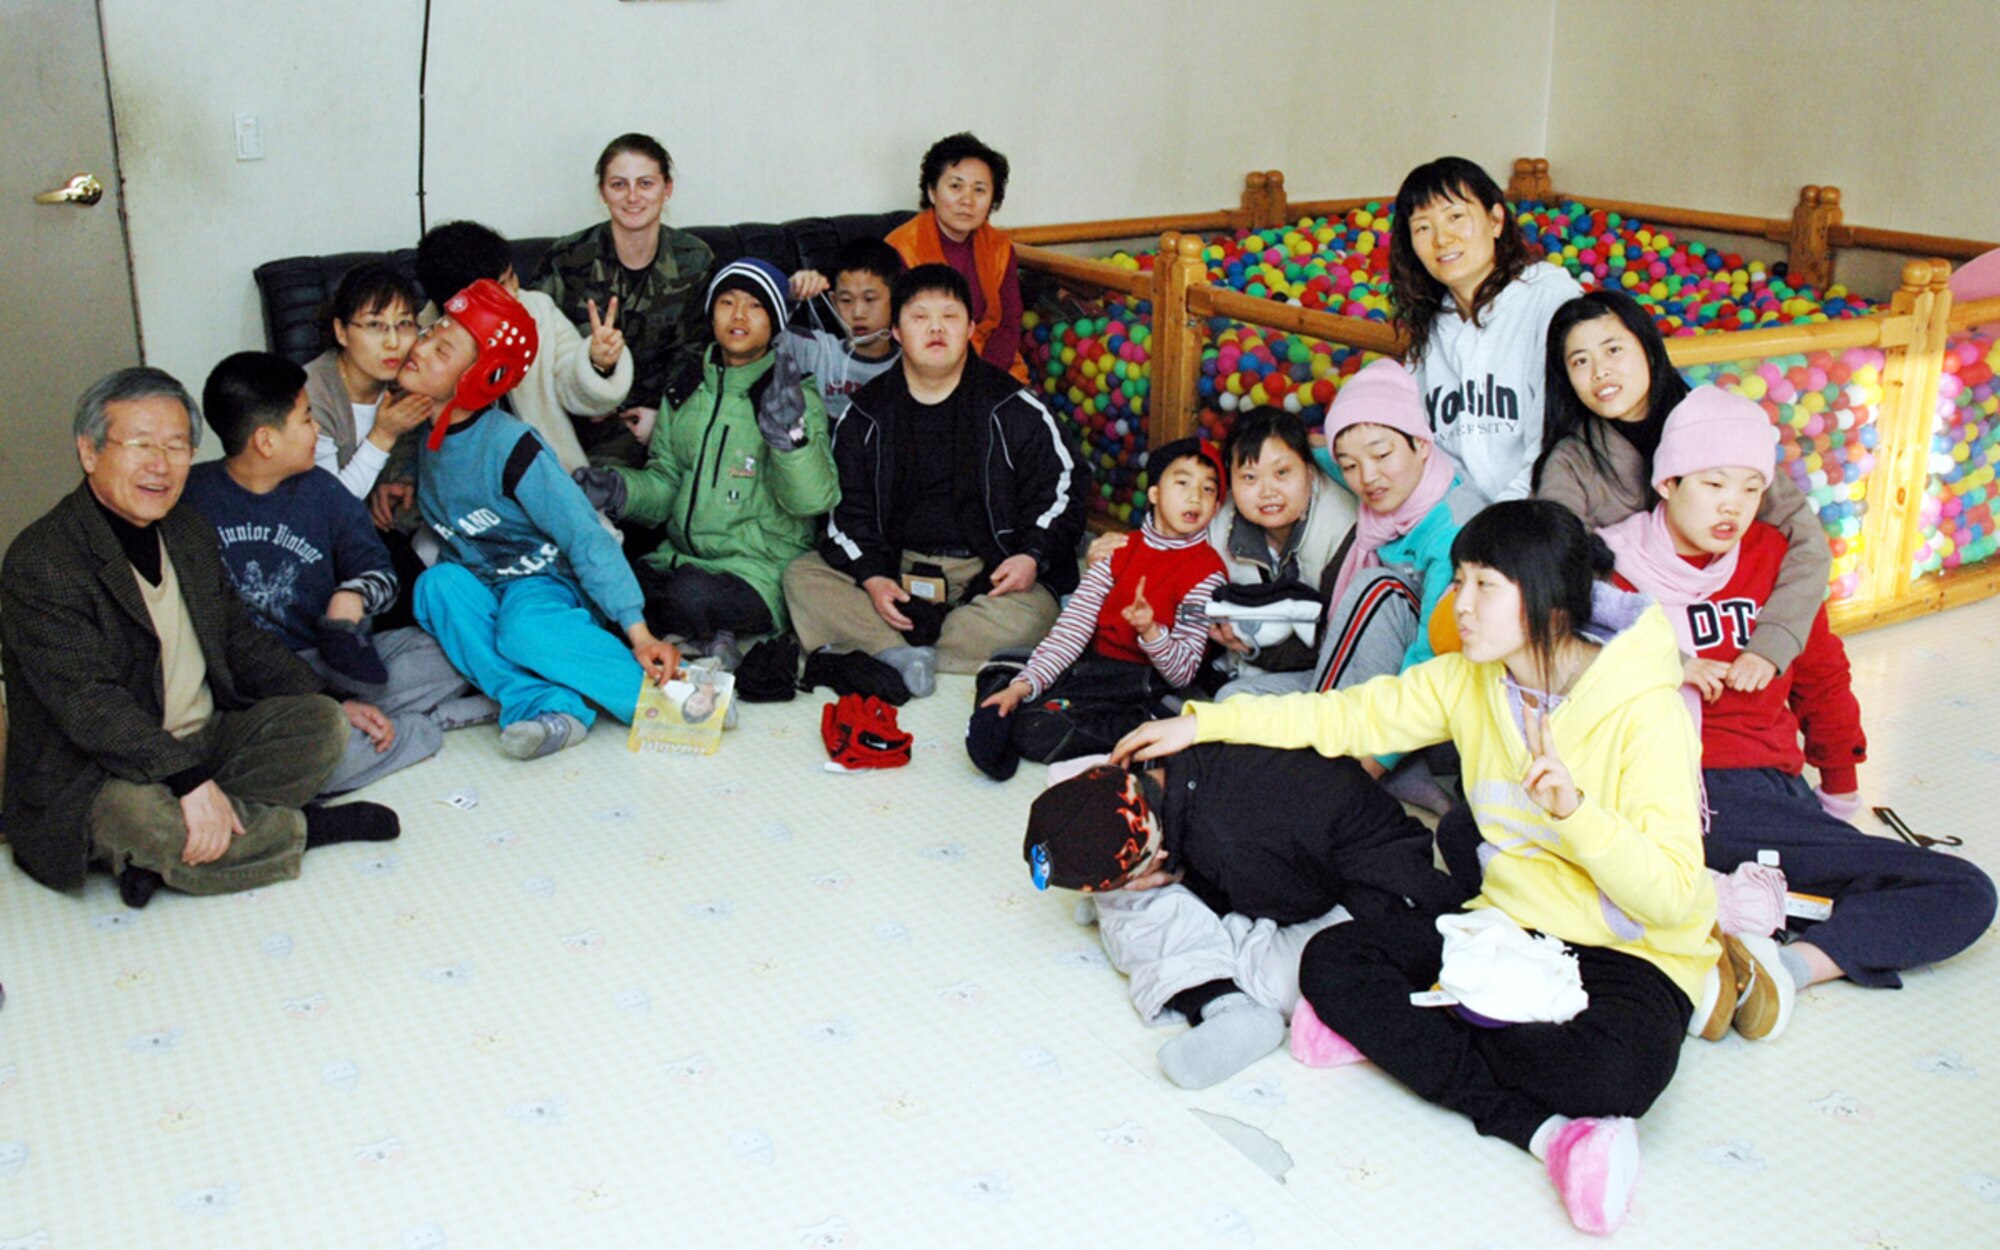 PYONGTAEK, Repulic of Korea --  Senior Airman Kristine Crawley, 51st Maintenance Squadron, (center), spent time with children and adults at a Korean school for the deaf in Pyongtaek on Feb. 1.  Airman Crawley presented enough winter gloves, hats, mittens, scarves and slippers to cloth two dozen people on behalf of the Lt. Col. (retired) Clete Knaub family in Laurel, Mont. (U.S. Air Force photo by Tech. Sgt. Michael O’Connor)